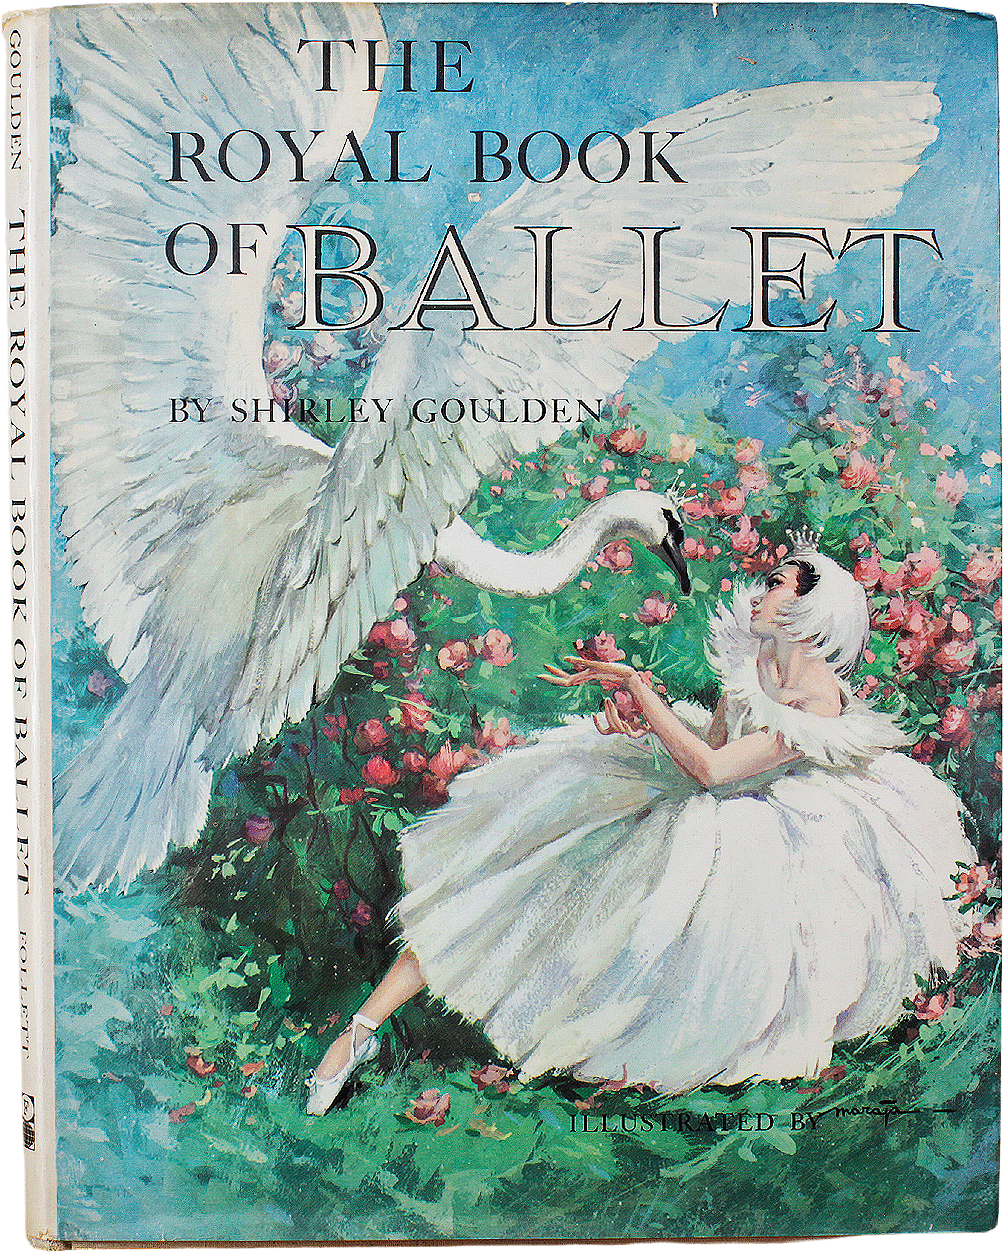 60s The Royal Book Of Ballet 2nd Ed by Shirley Goulden